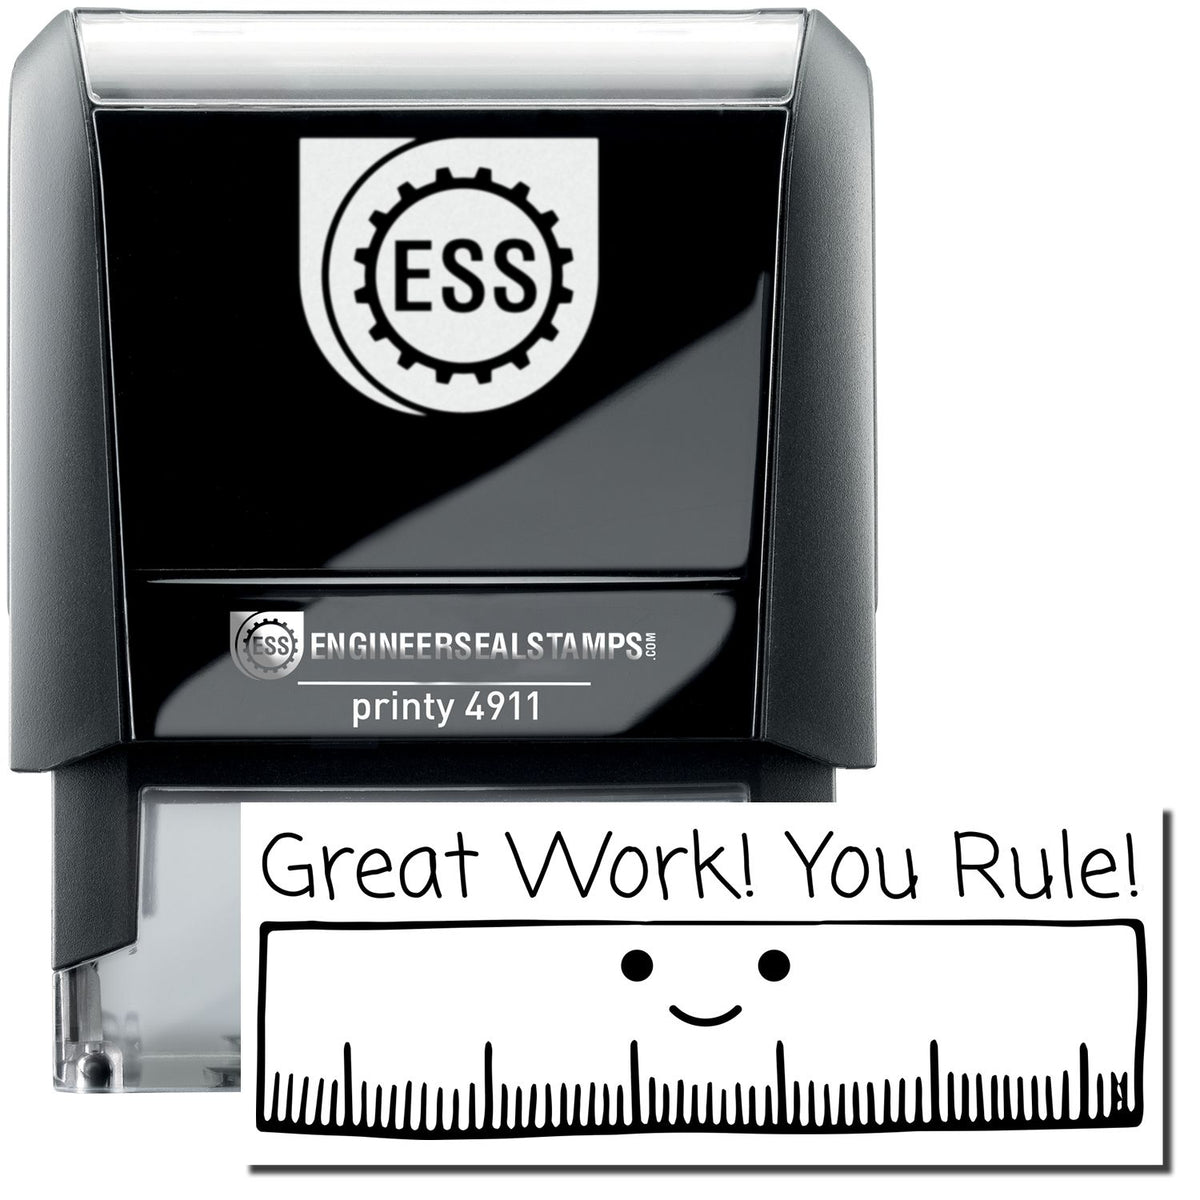 A self-inking stamp with a stamped image showing how the text &quot;Great Work! You Rule!&quot; (with a large image of a ruler with a smiling face underneath) is displayed after stamping.